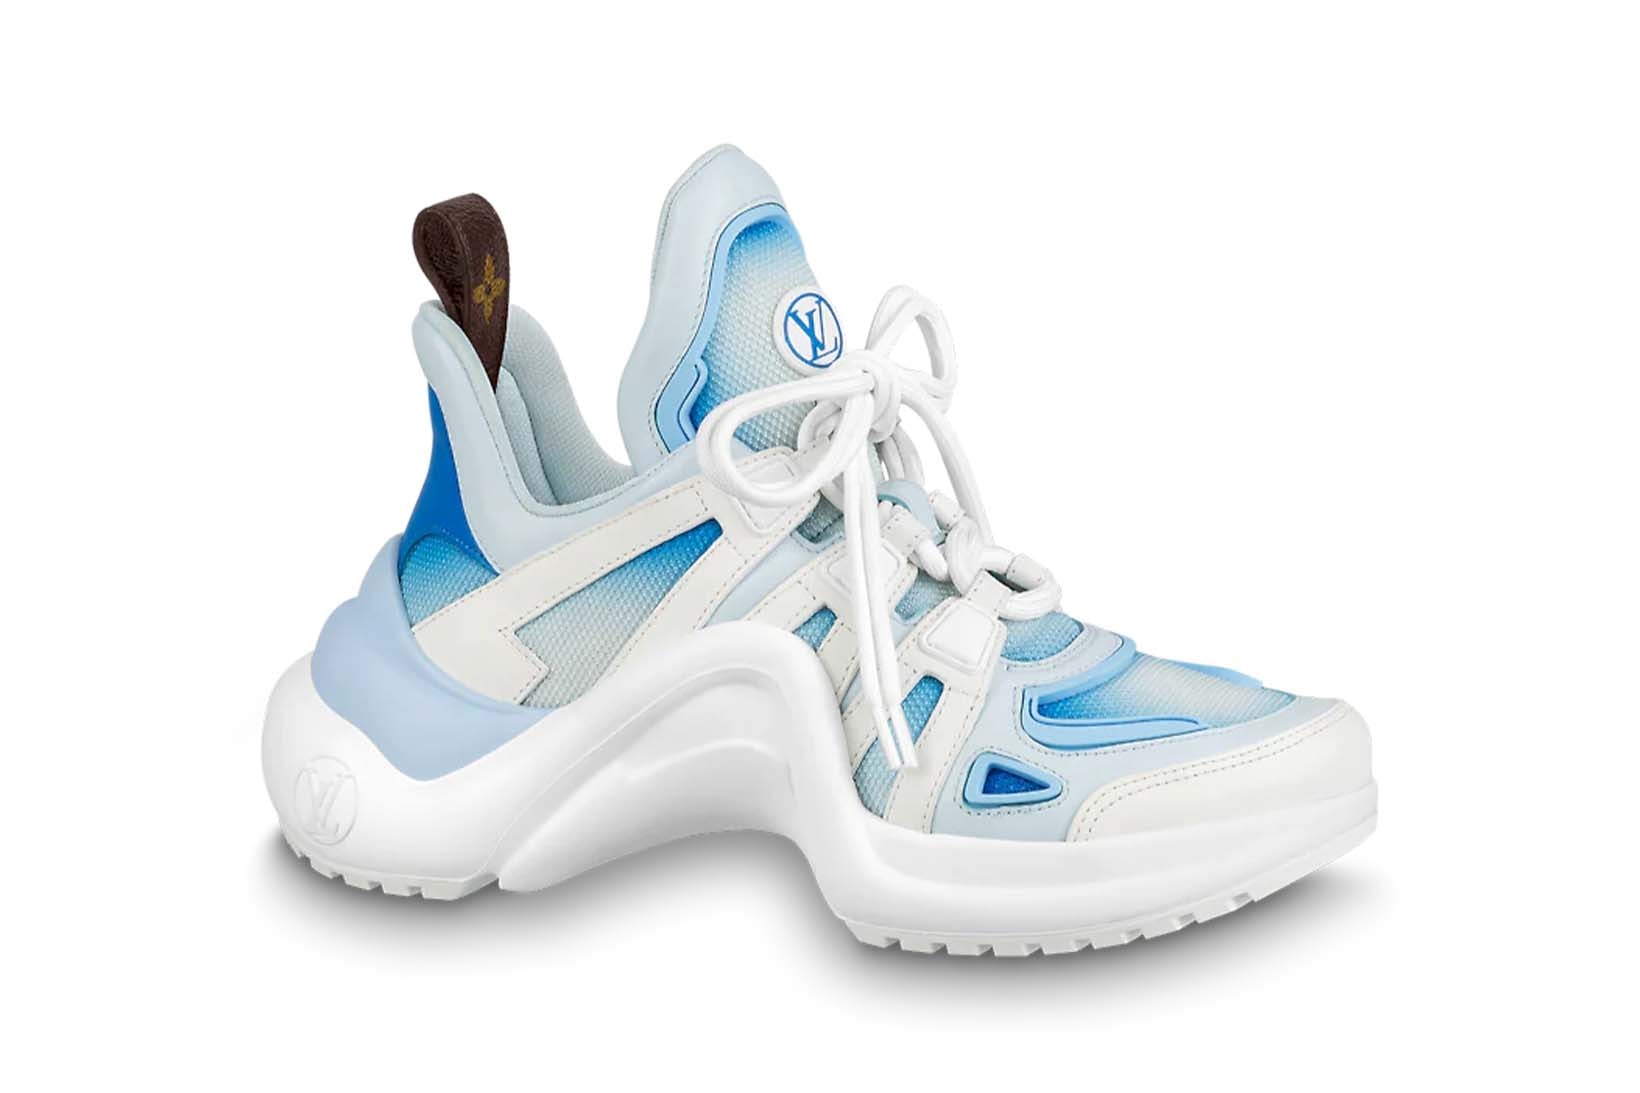 Louis Vuitton unveils a new range of Archlight Sneakers: The LV Archlight  2.0